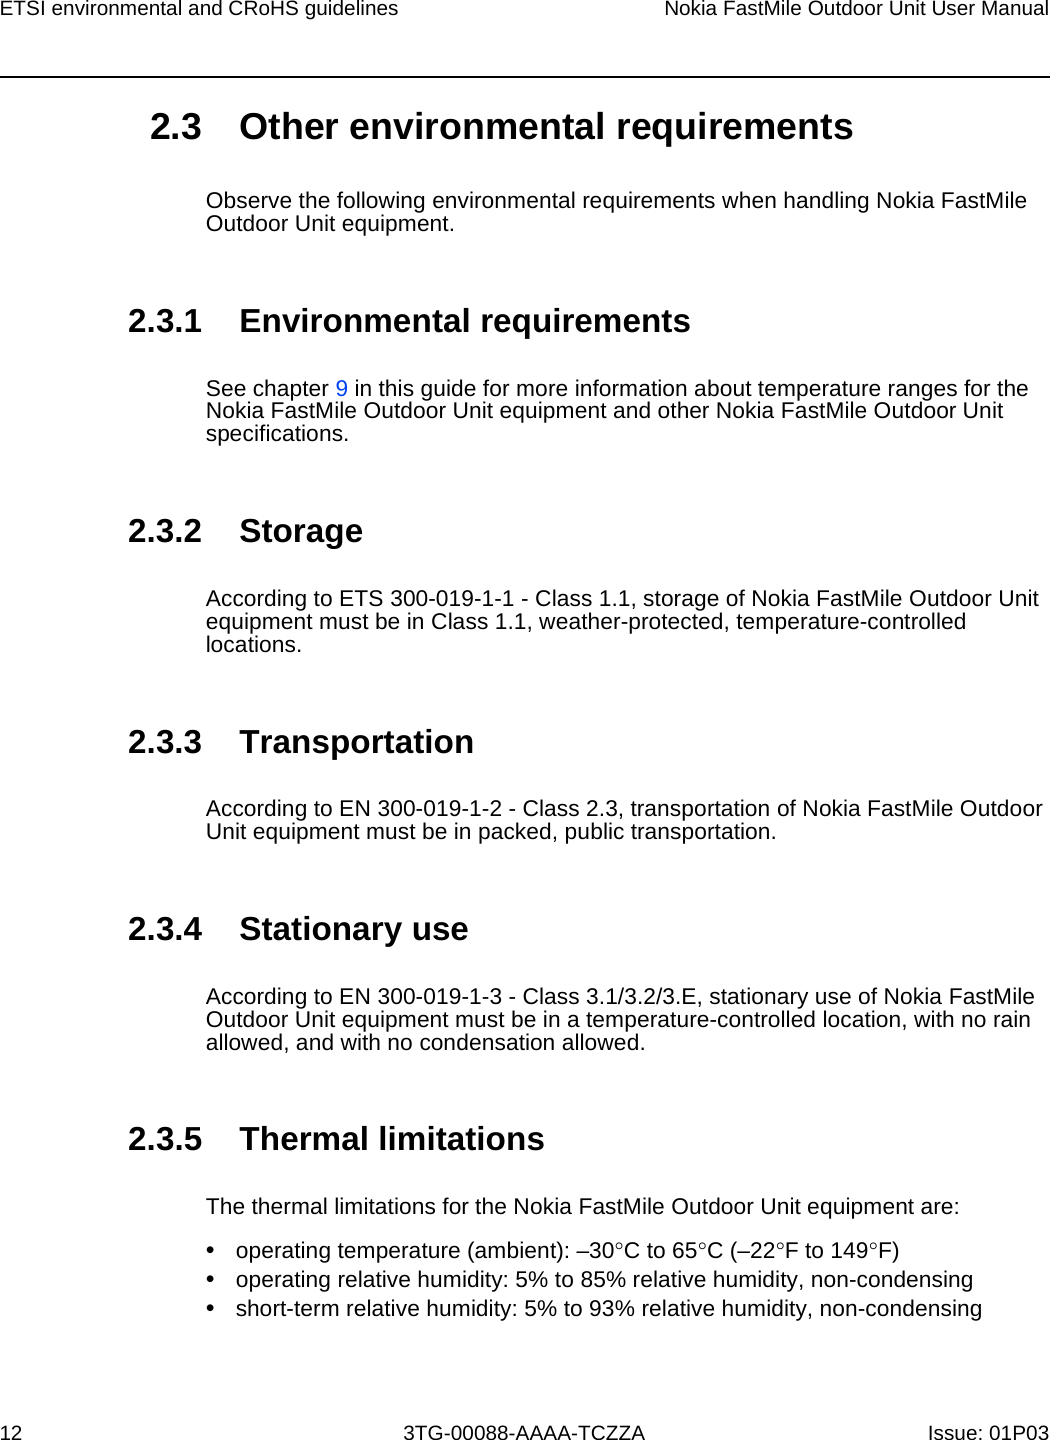 Page 11 of Nokia Bell 34003800FM20 FastMile Compact User Manual Nokia FastMile Outdoor Unit